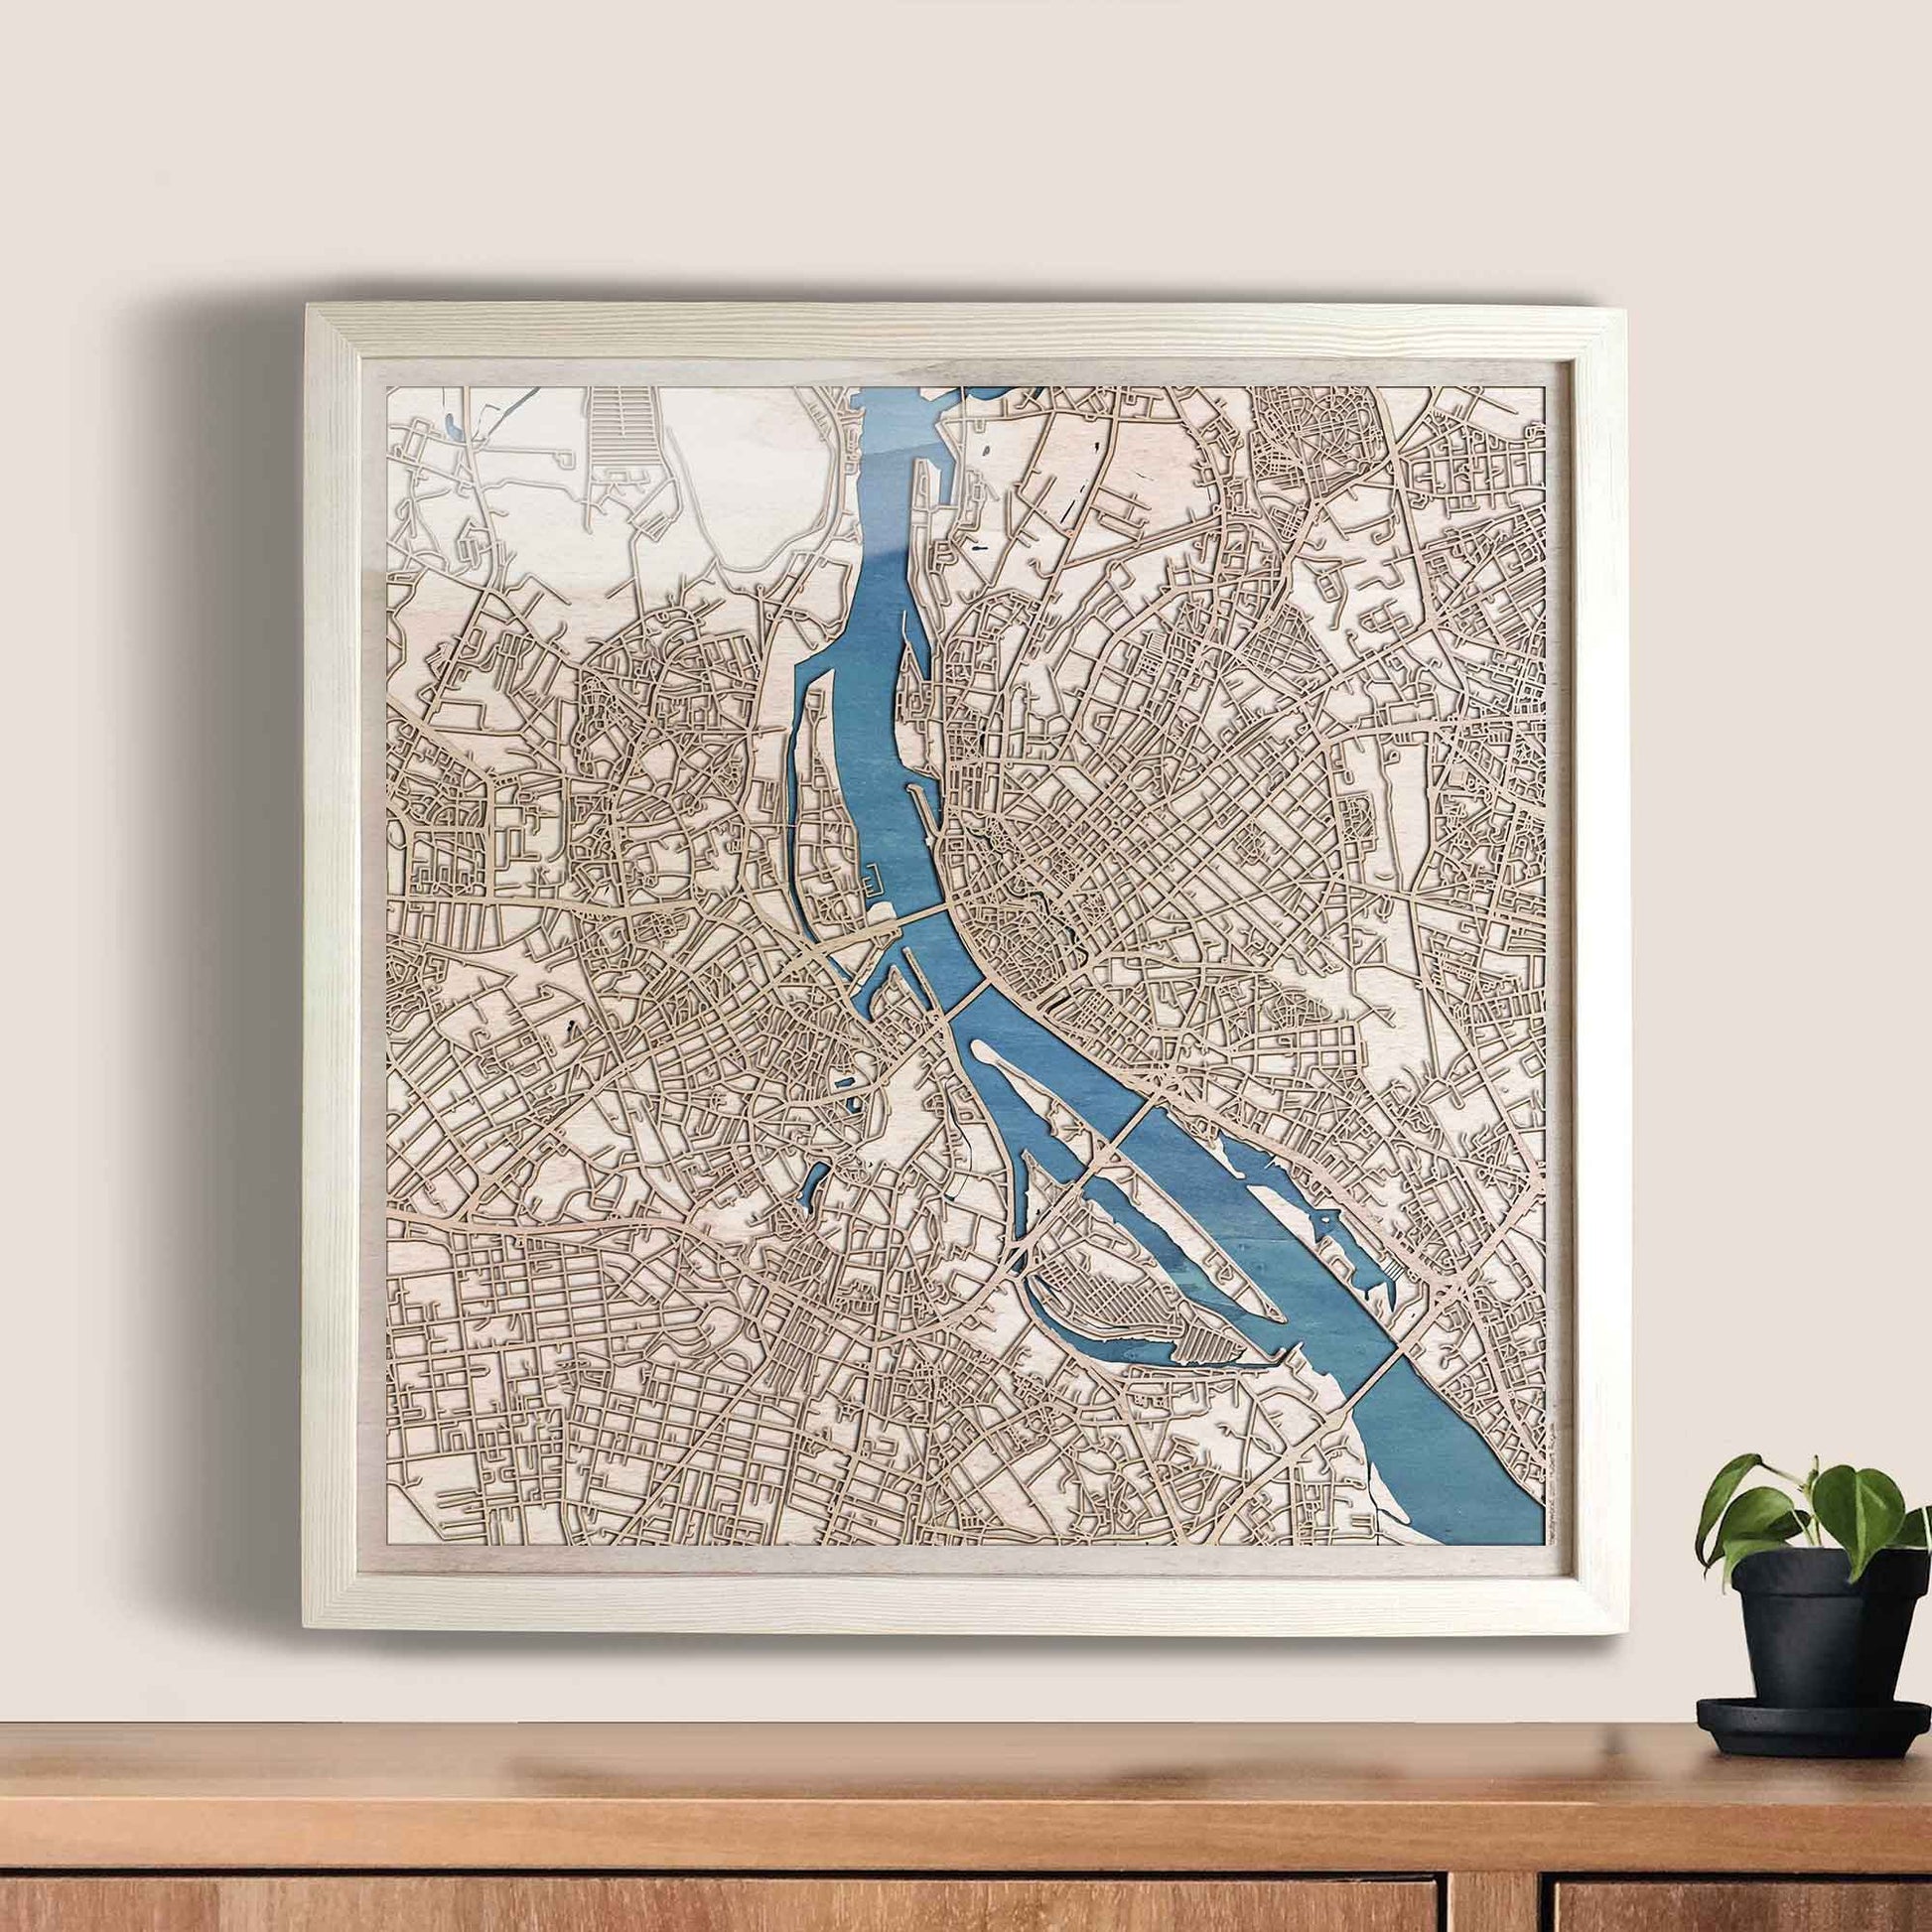 Riga Wooden Map by CityWood - Custom Wood Map Art - Unique Laser Cut Engraved - Anniversary Gift